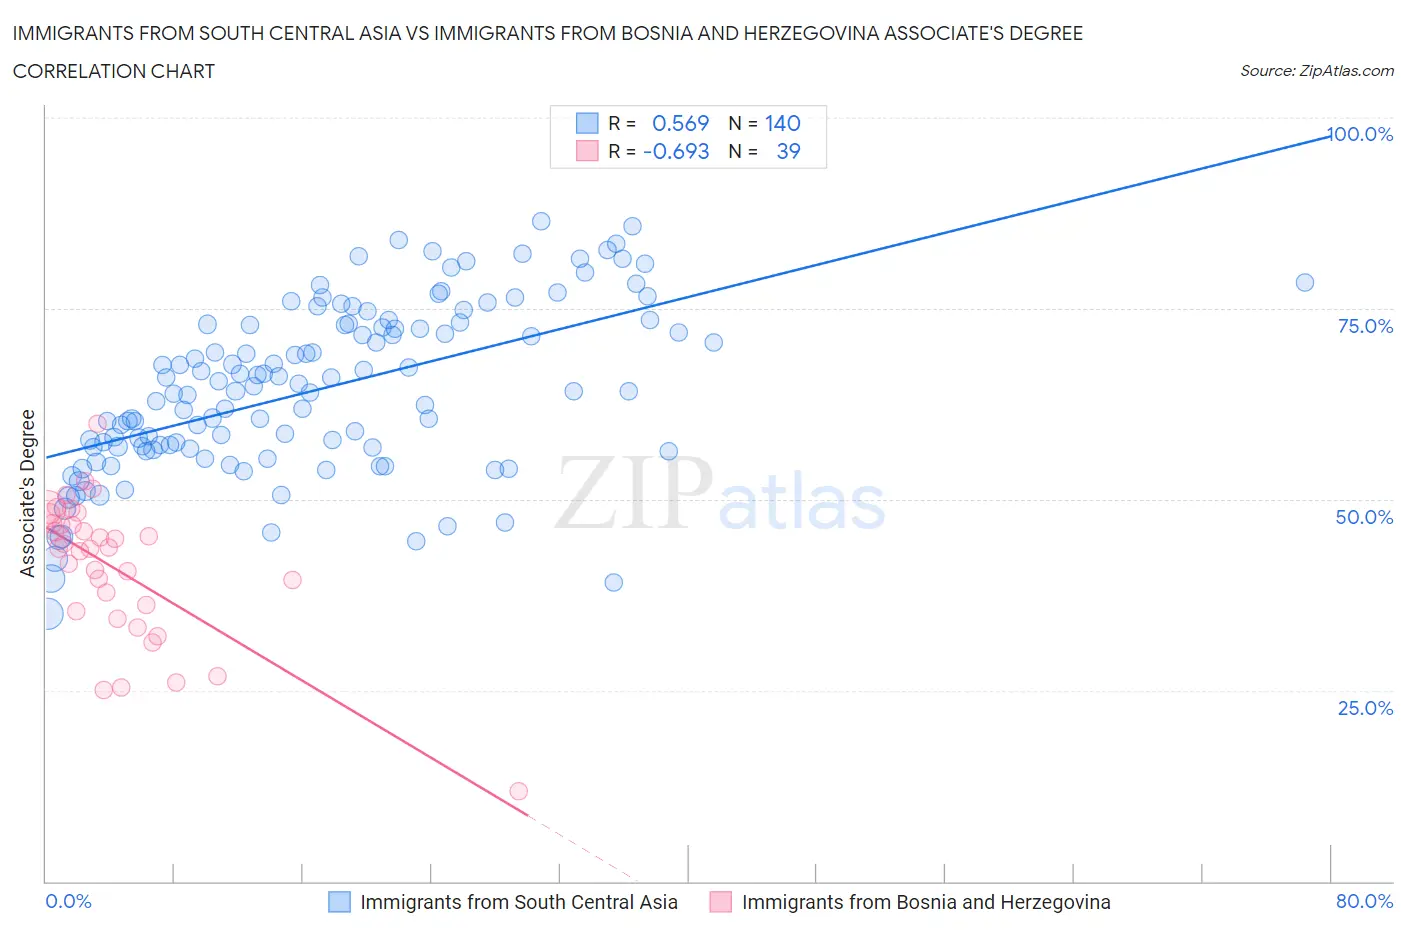 Immigrants from South Central Asia vs Immigrants from Bosnia and Herzegovina Associate's Degree